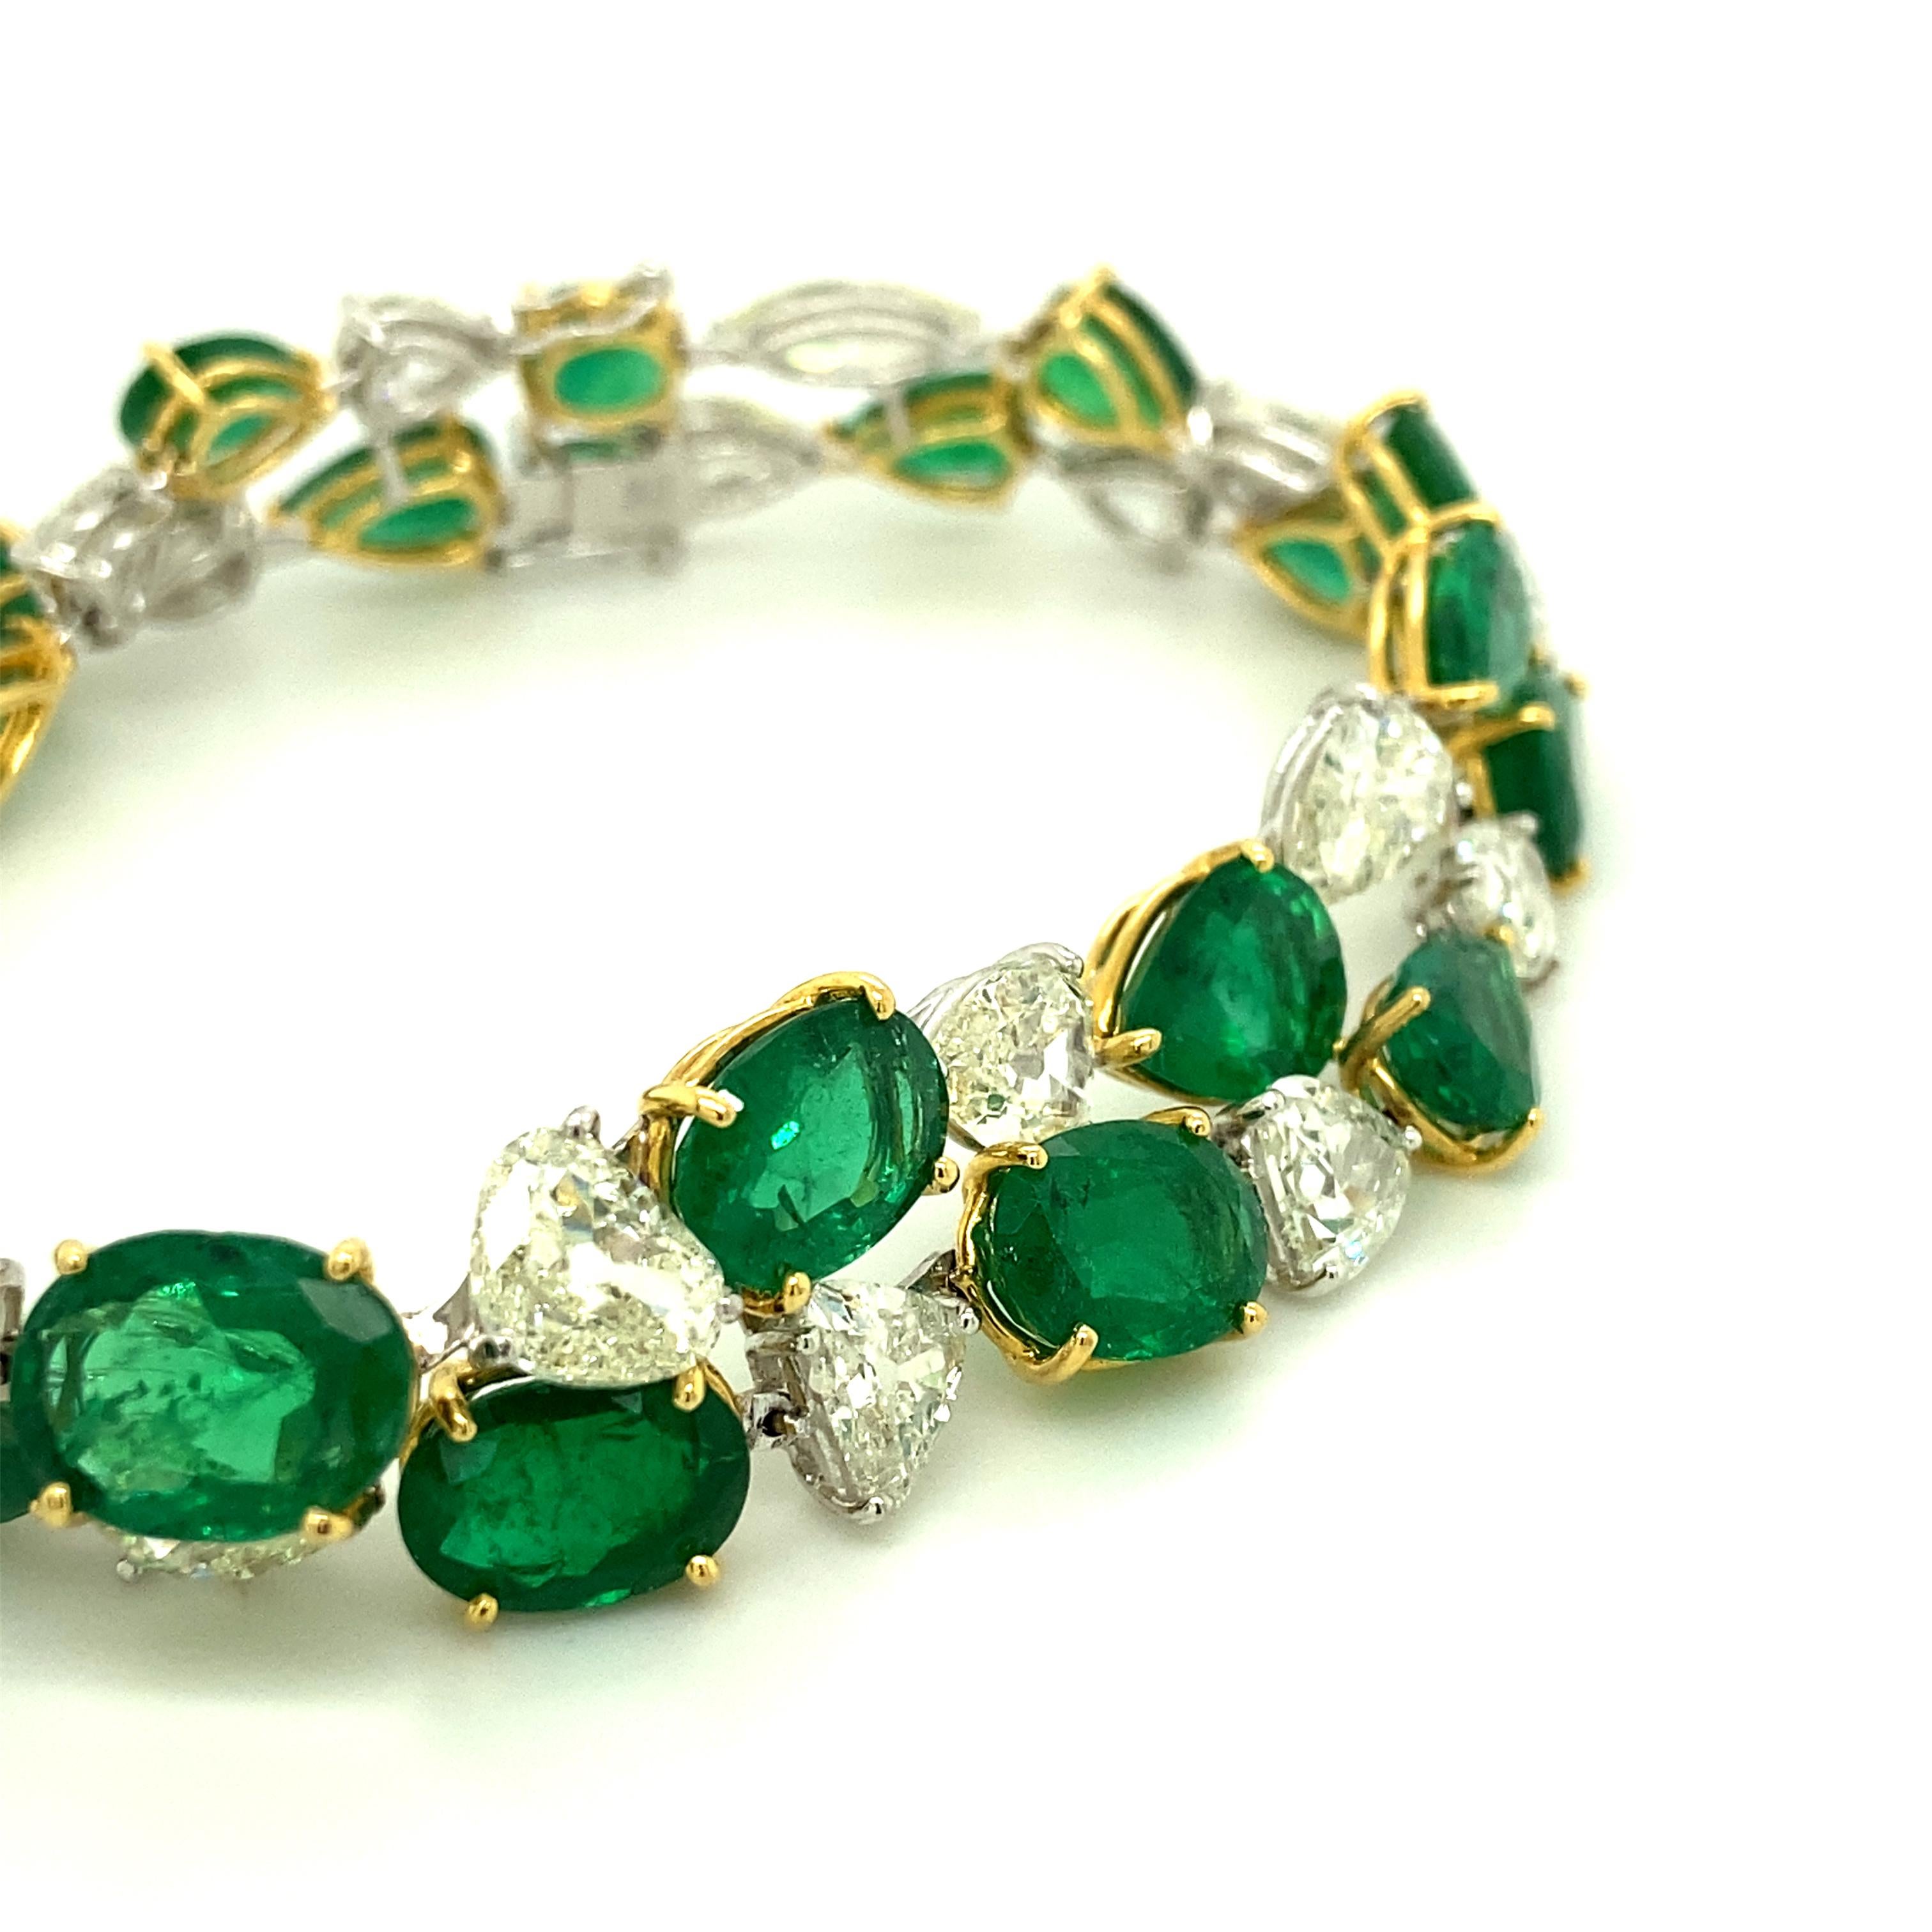 Contemporary 32.62 Carat Emerald and White Old Cut Diamond Gold Bracelet For Sale